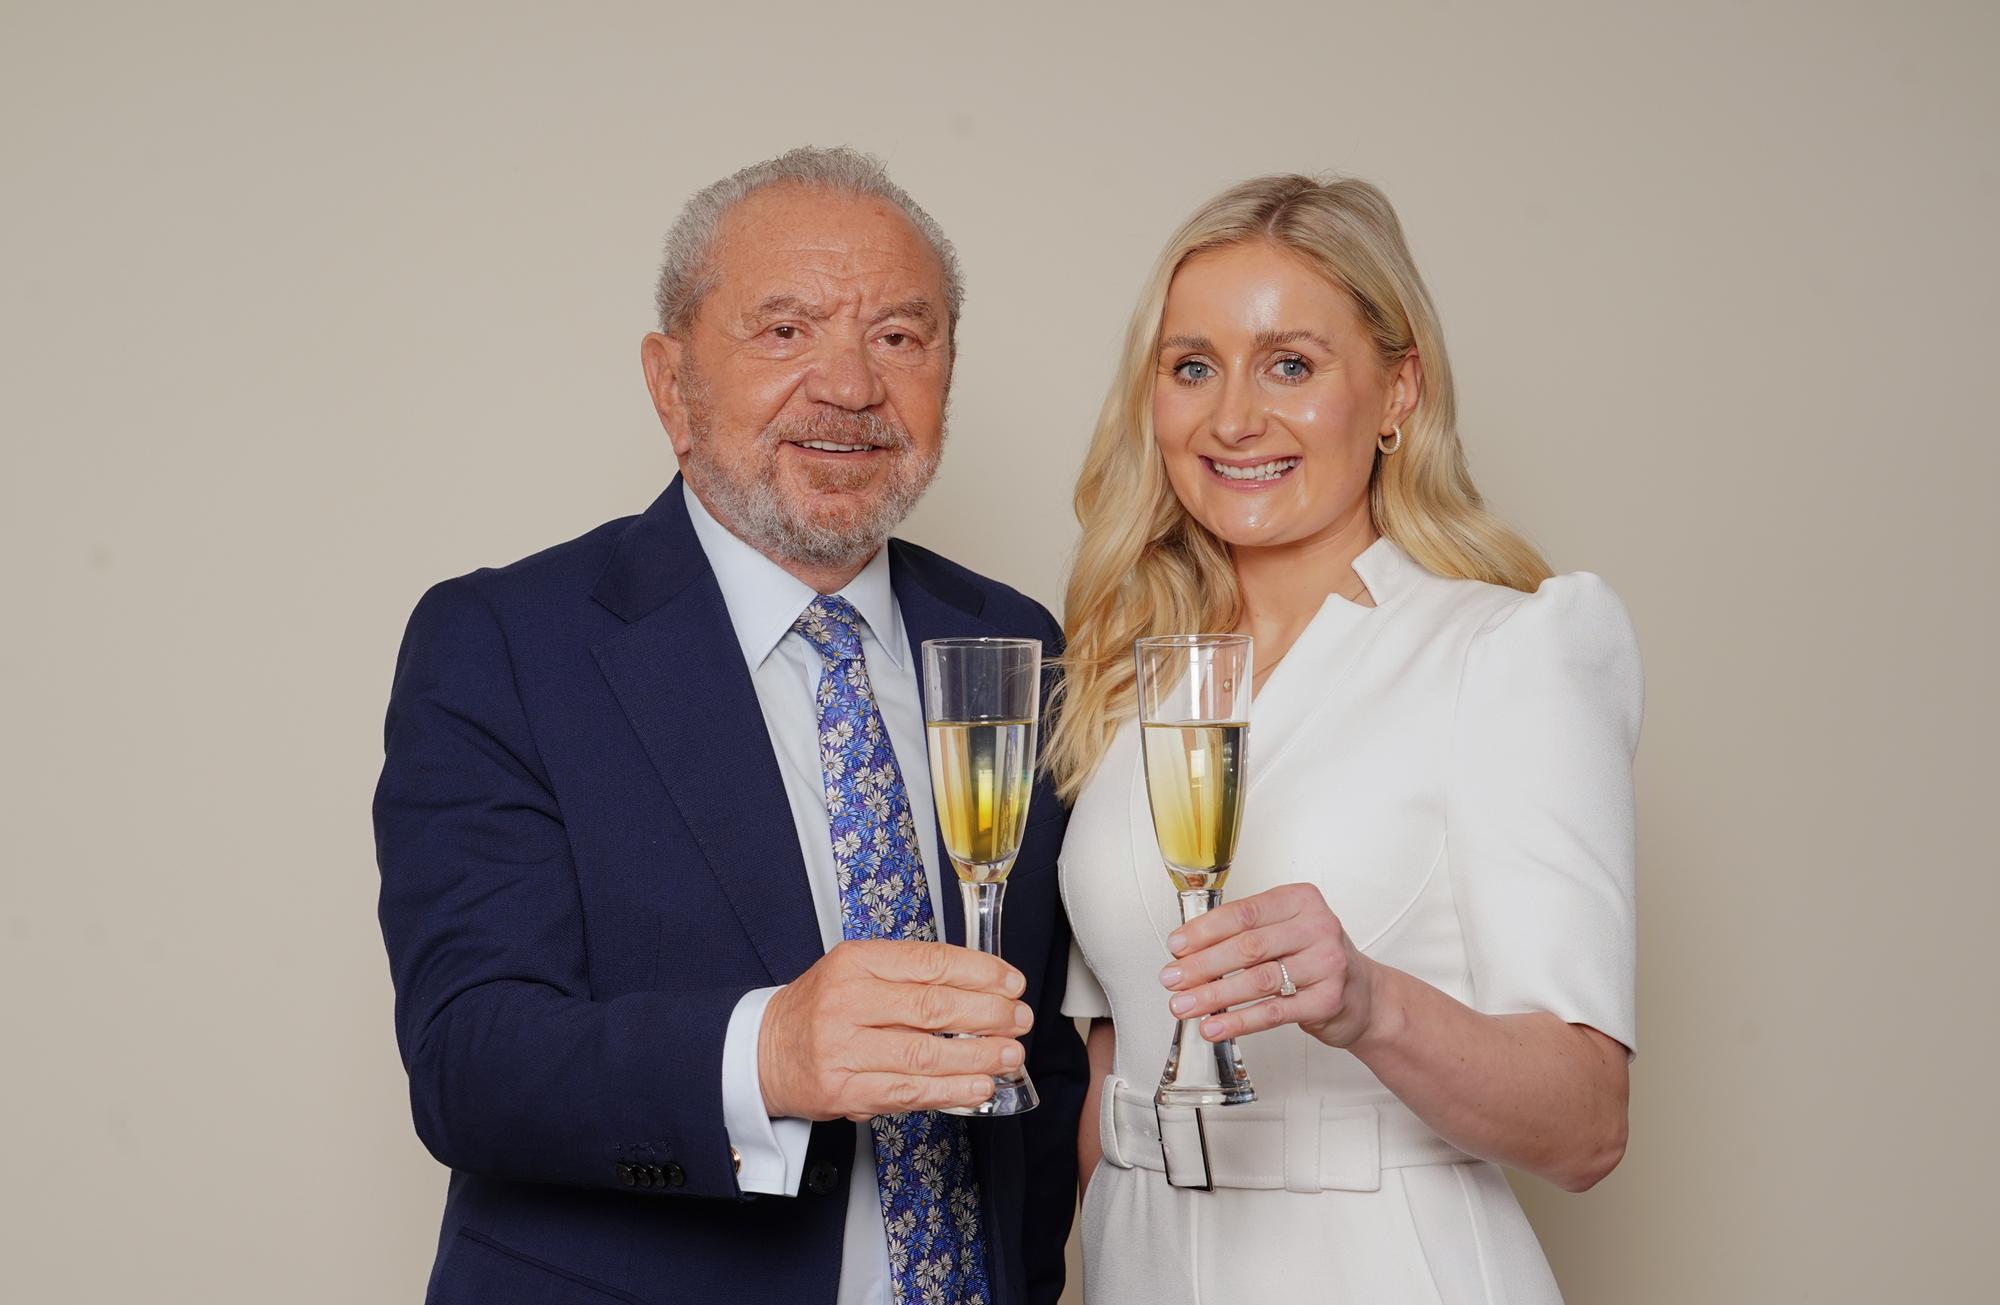 rachel woolford: yorkshire fitness studio owner becomes lord alan sugar’s latest business partner after win